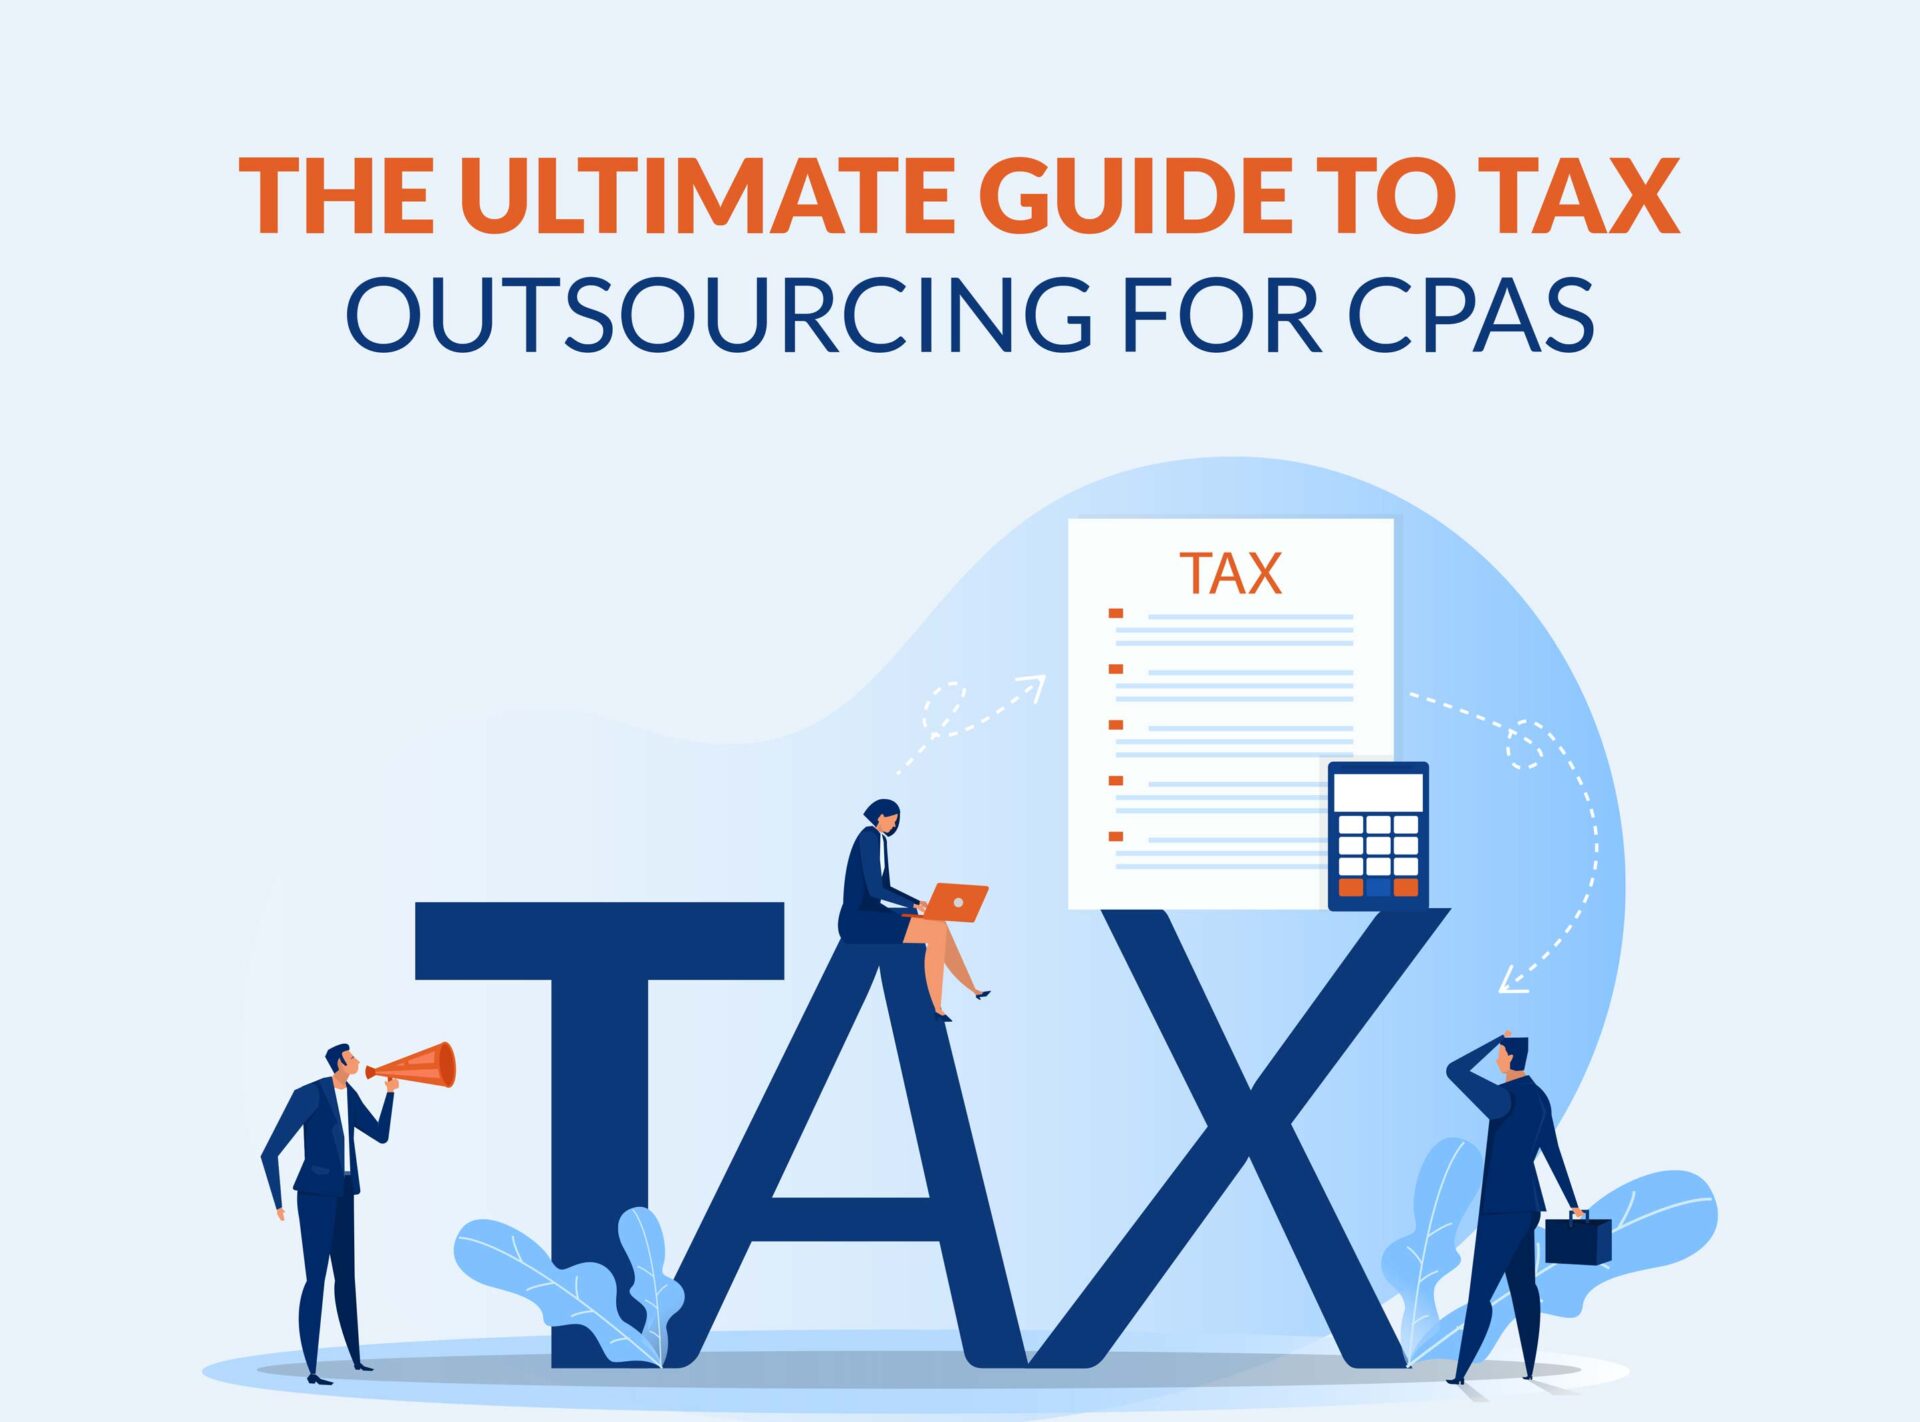 Essential Insight: The Ultimate Guide to Tax Outsourcing for CPAs